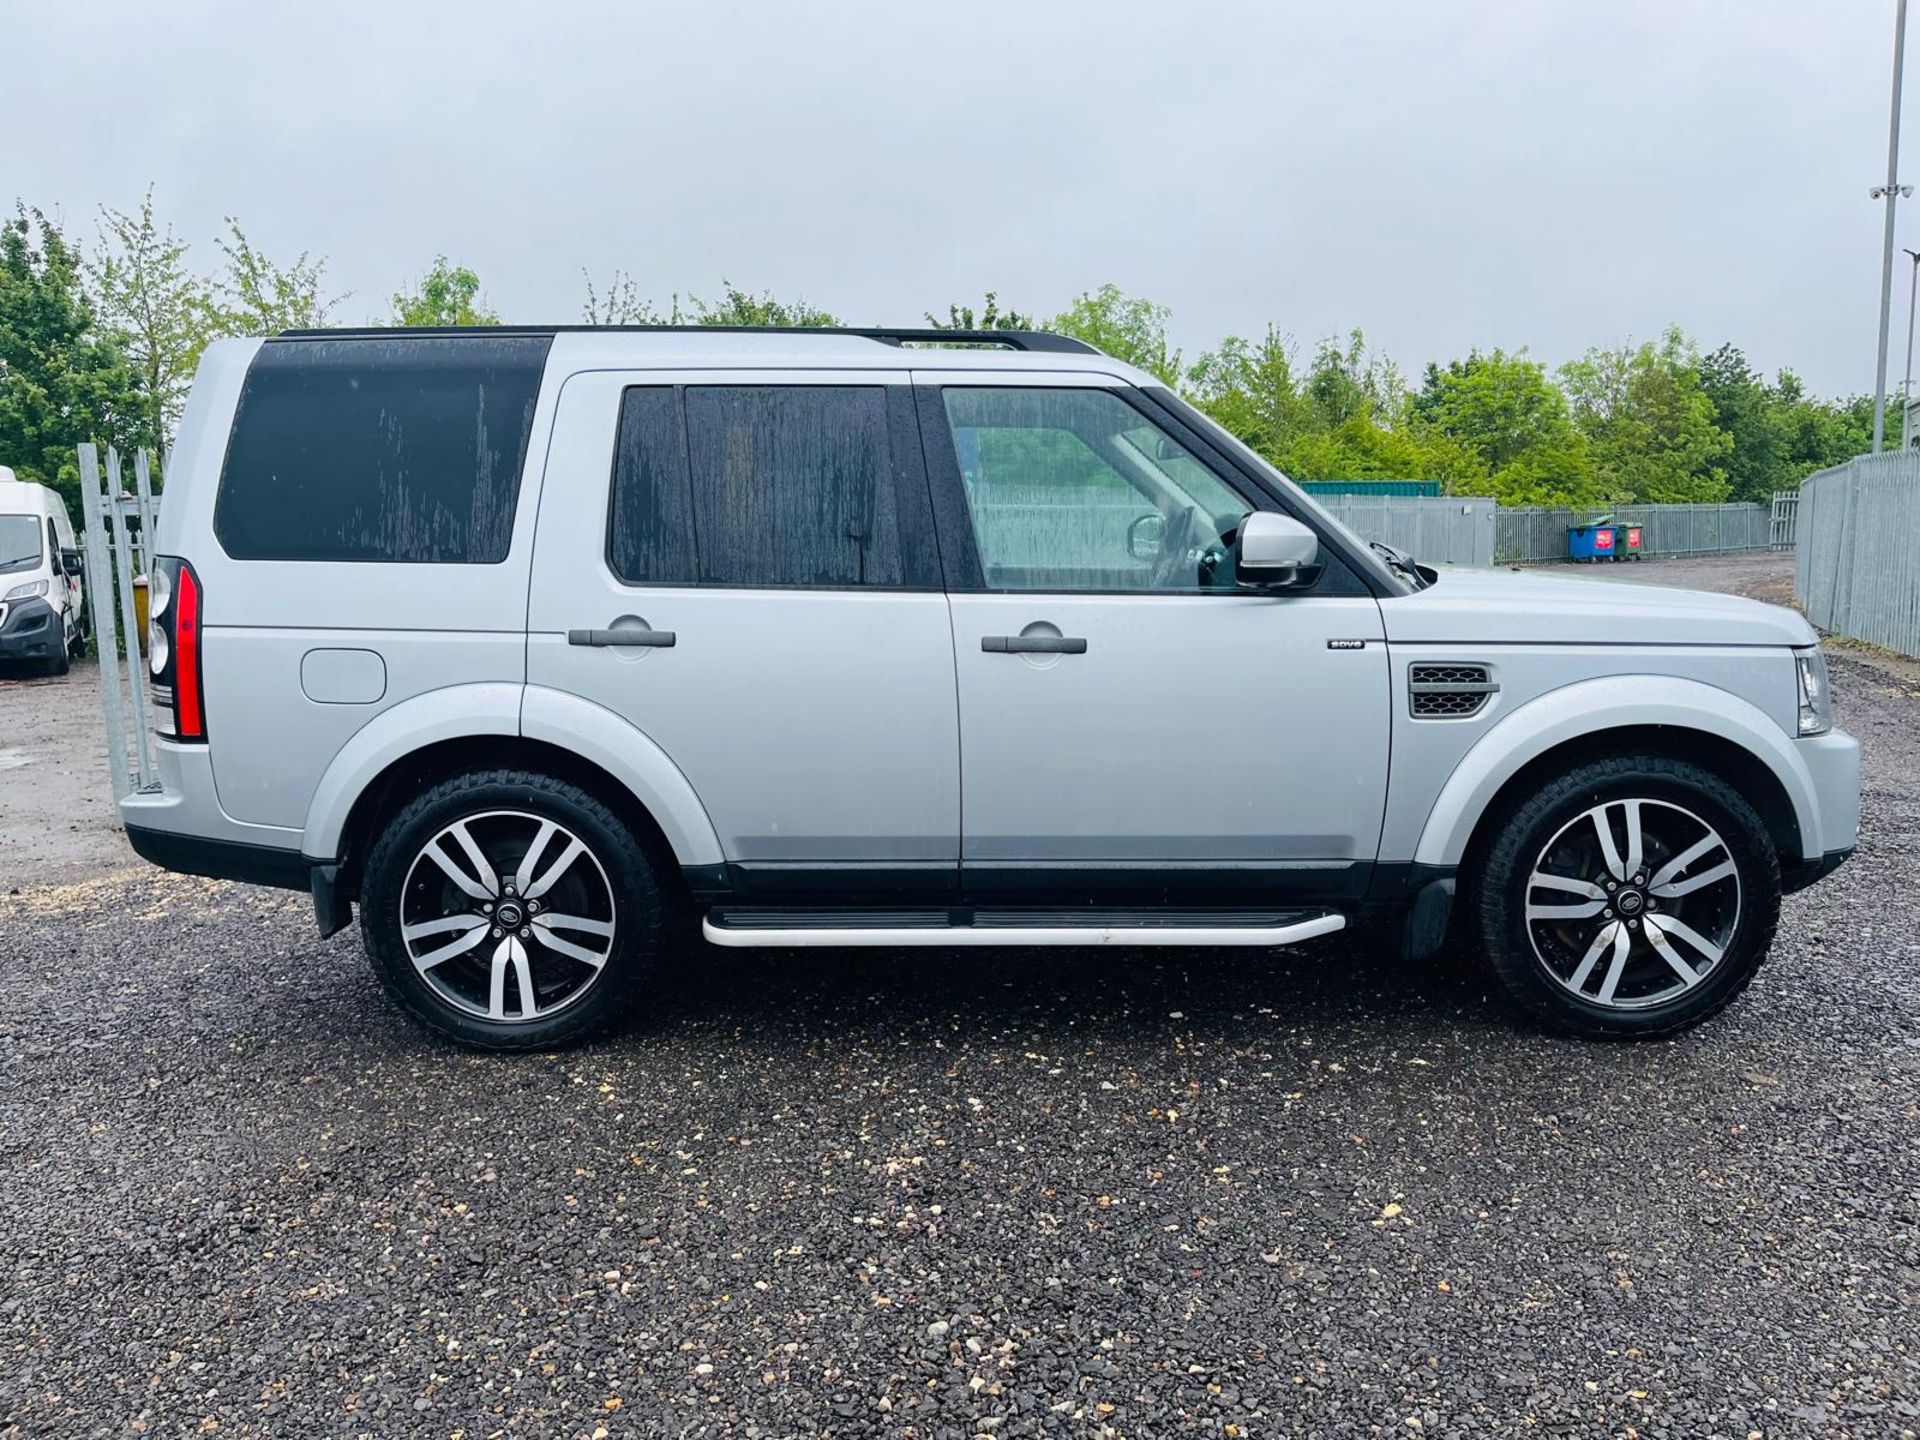 ** ON SALE ** Land Rover Discovery 4 3.0 SD V6 255 2014 '64 Reg' - A/C - Alloy Wheels - Tow Bar - Image 10 of 30